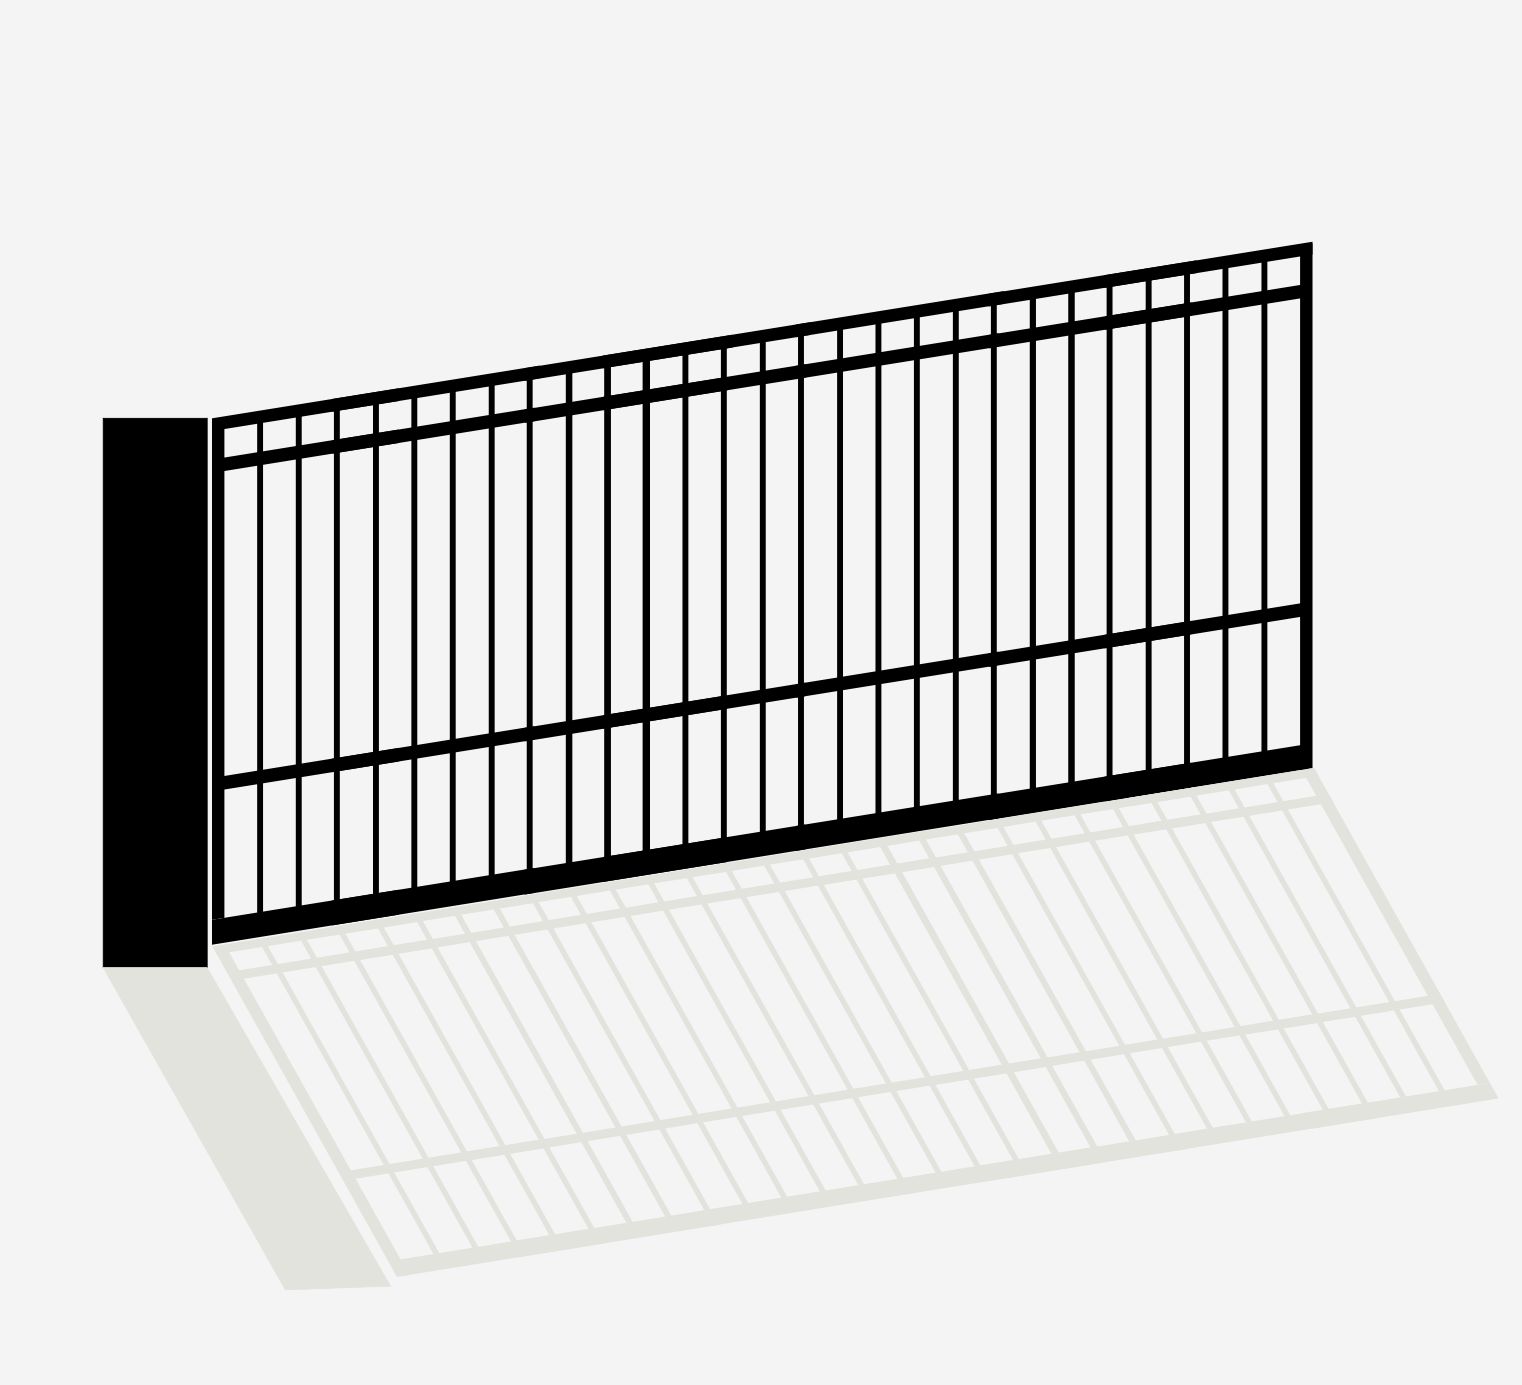 Ready Made Single Swing Gates and Gate Frames | Available Stock Gates in Australia Driveway Gates,  Steel Gate and Frame, Electric Gate, Automatic Gates, Electric Gates, Auto Gate, Metal Gates, Metal Gate, Steel Gates and Frames